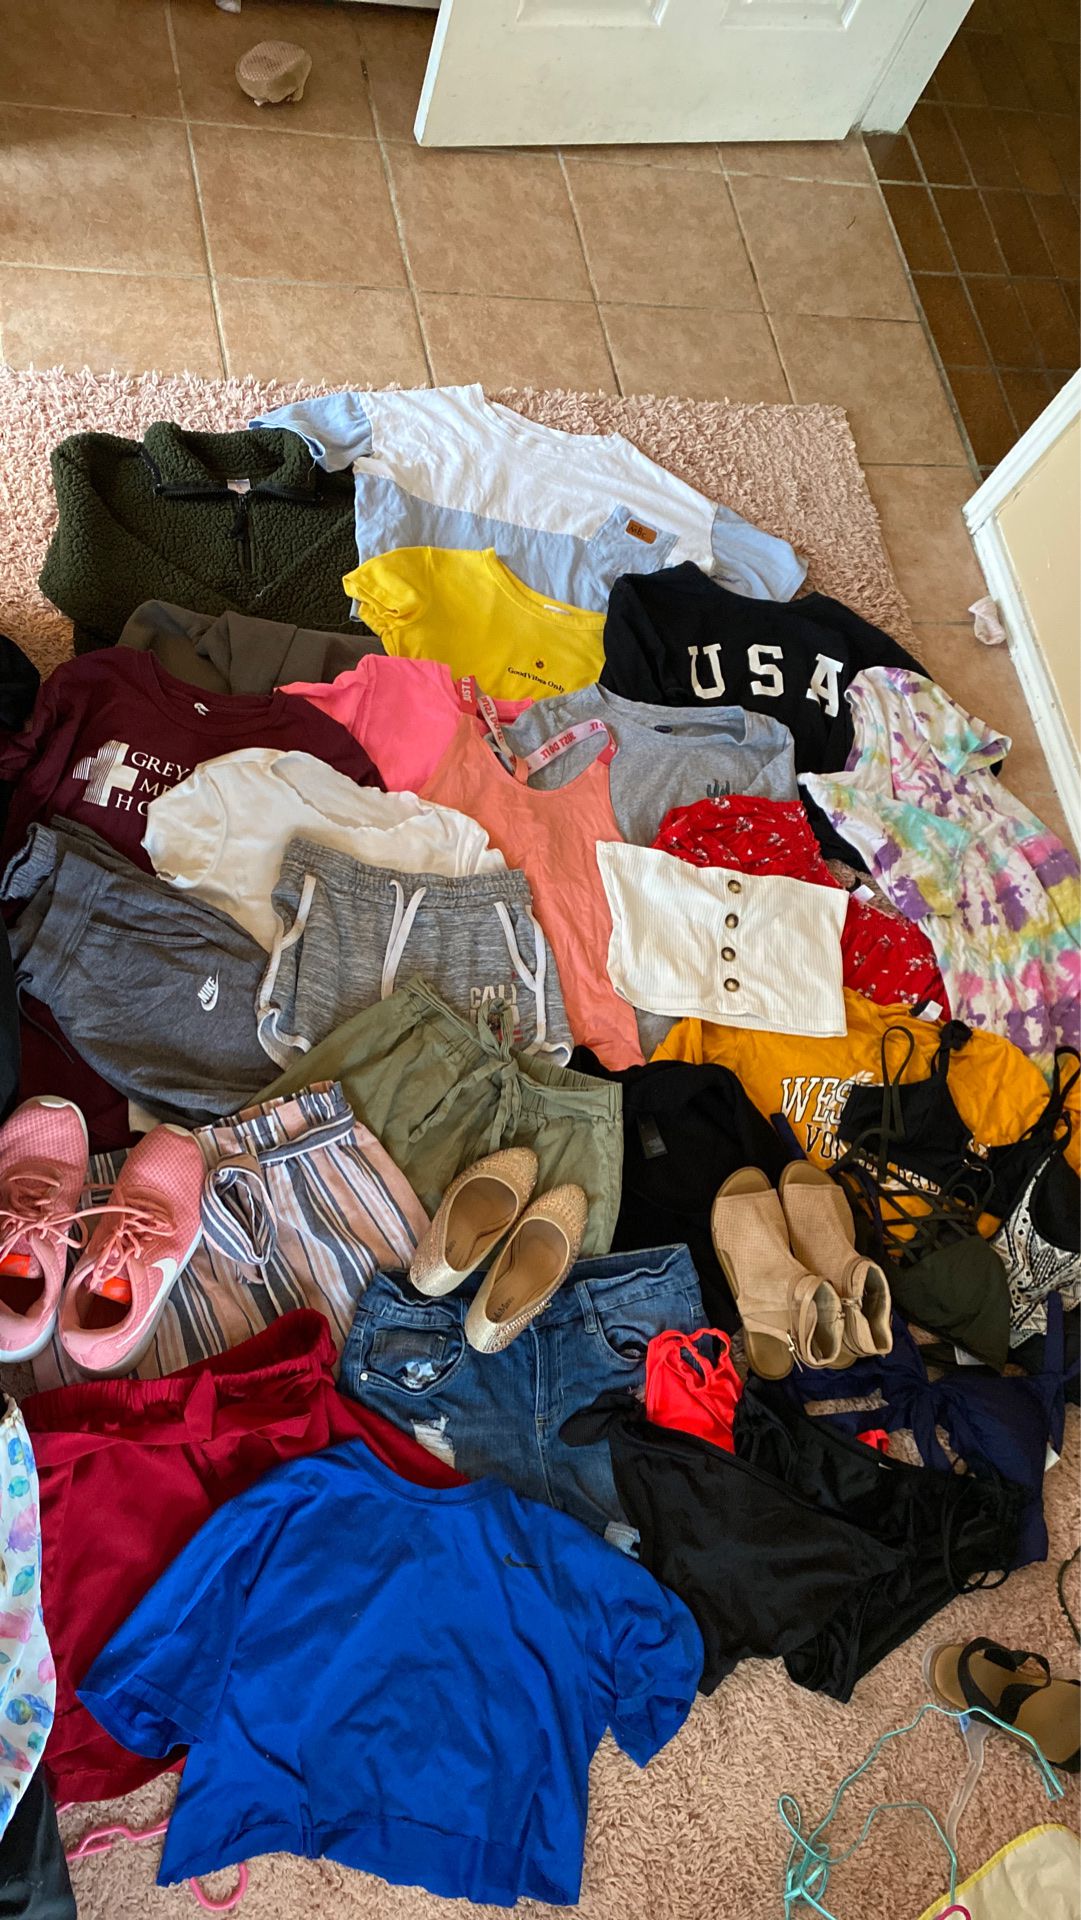 Women’s clothing, shoes(sz 7-8 ), swimsuits. Sizes vary from xs-large